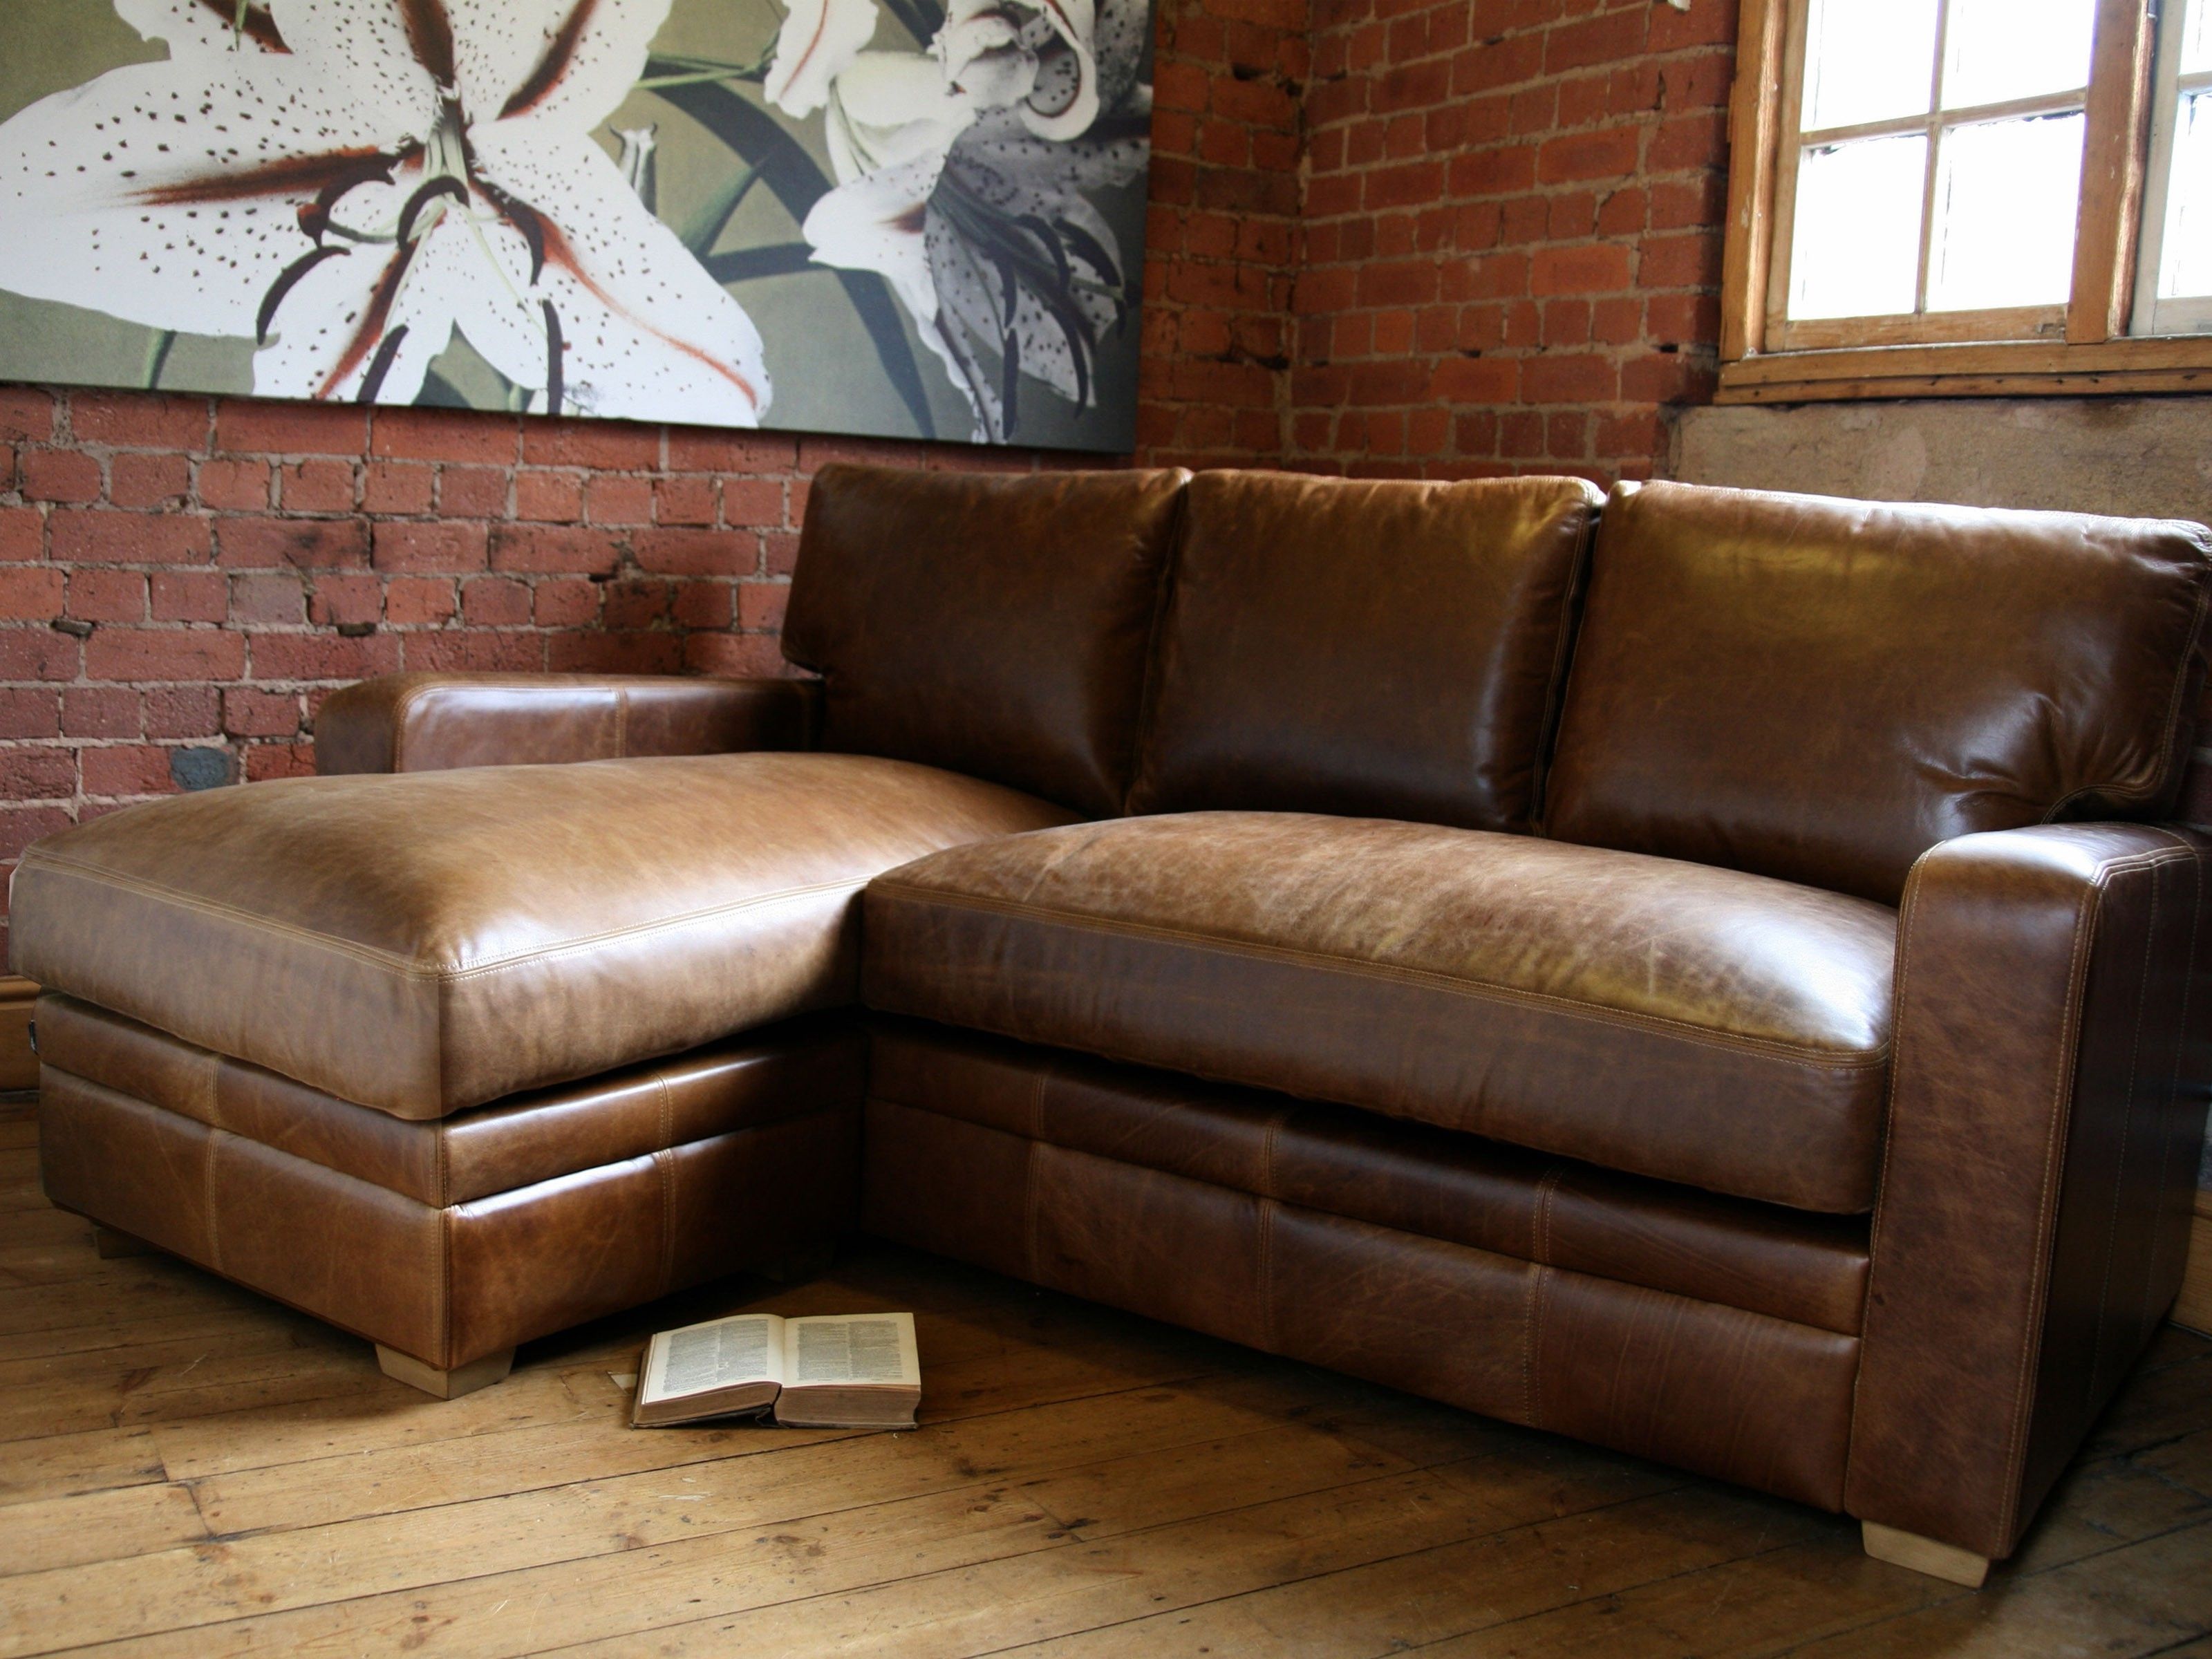 most popular leather sectional sofa